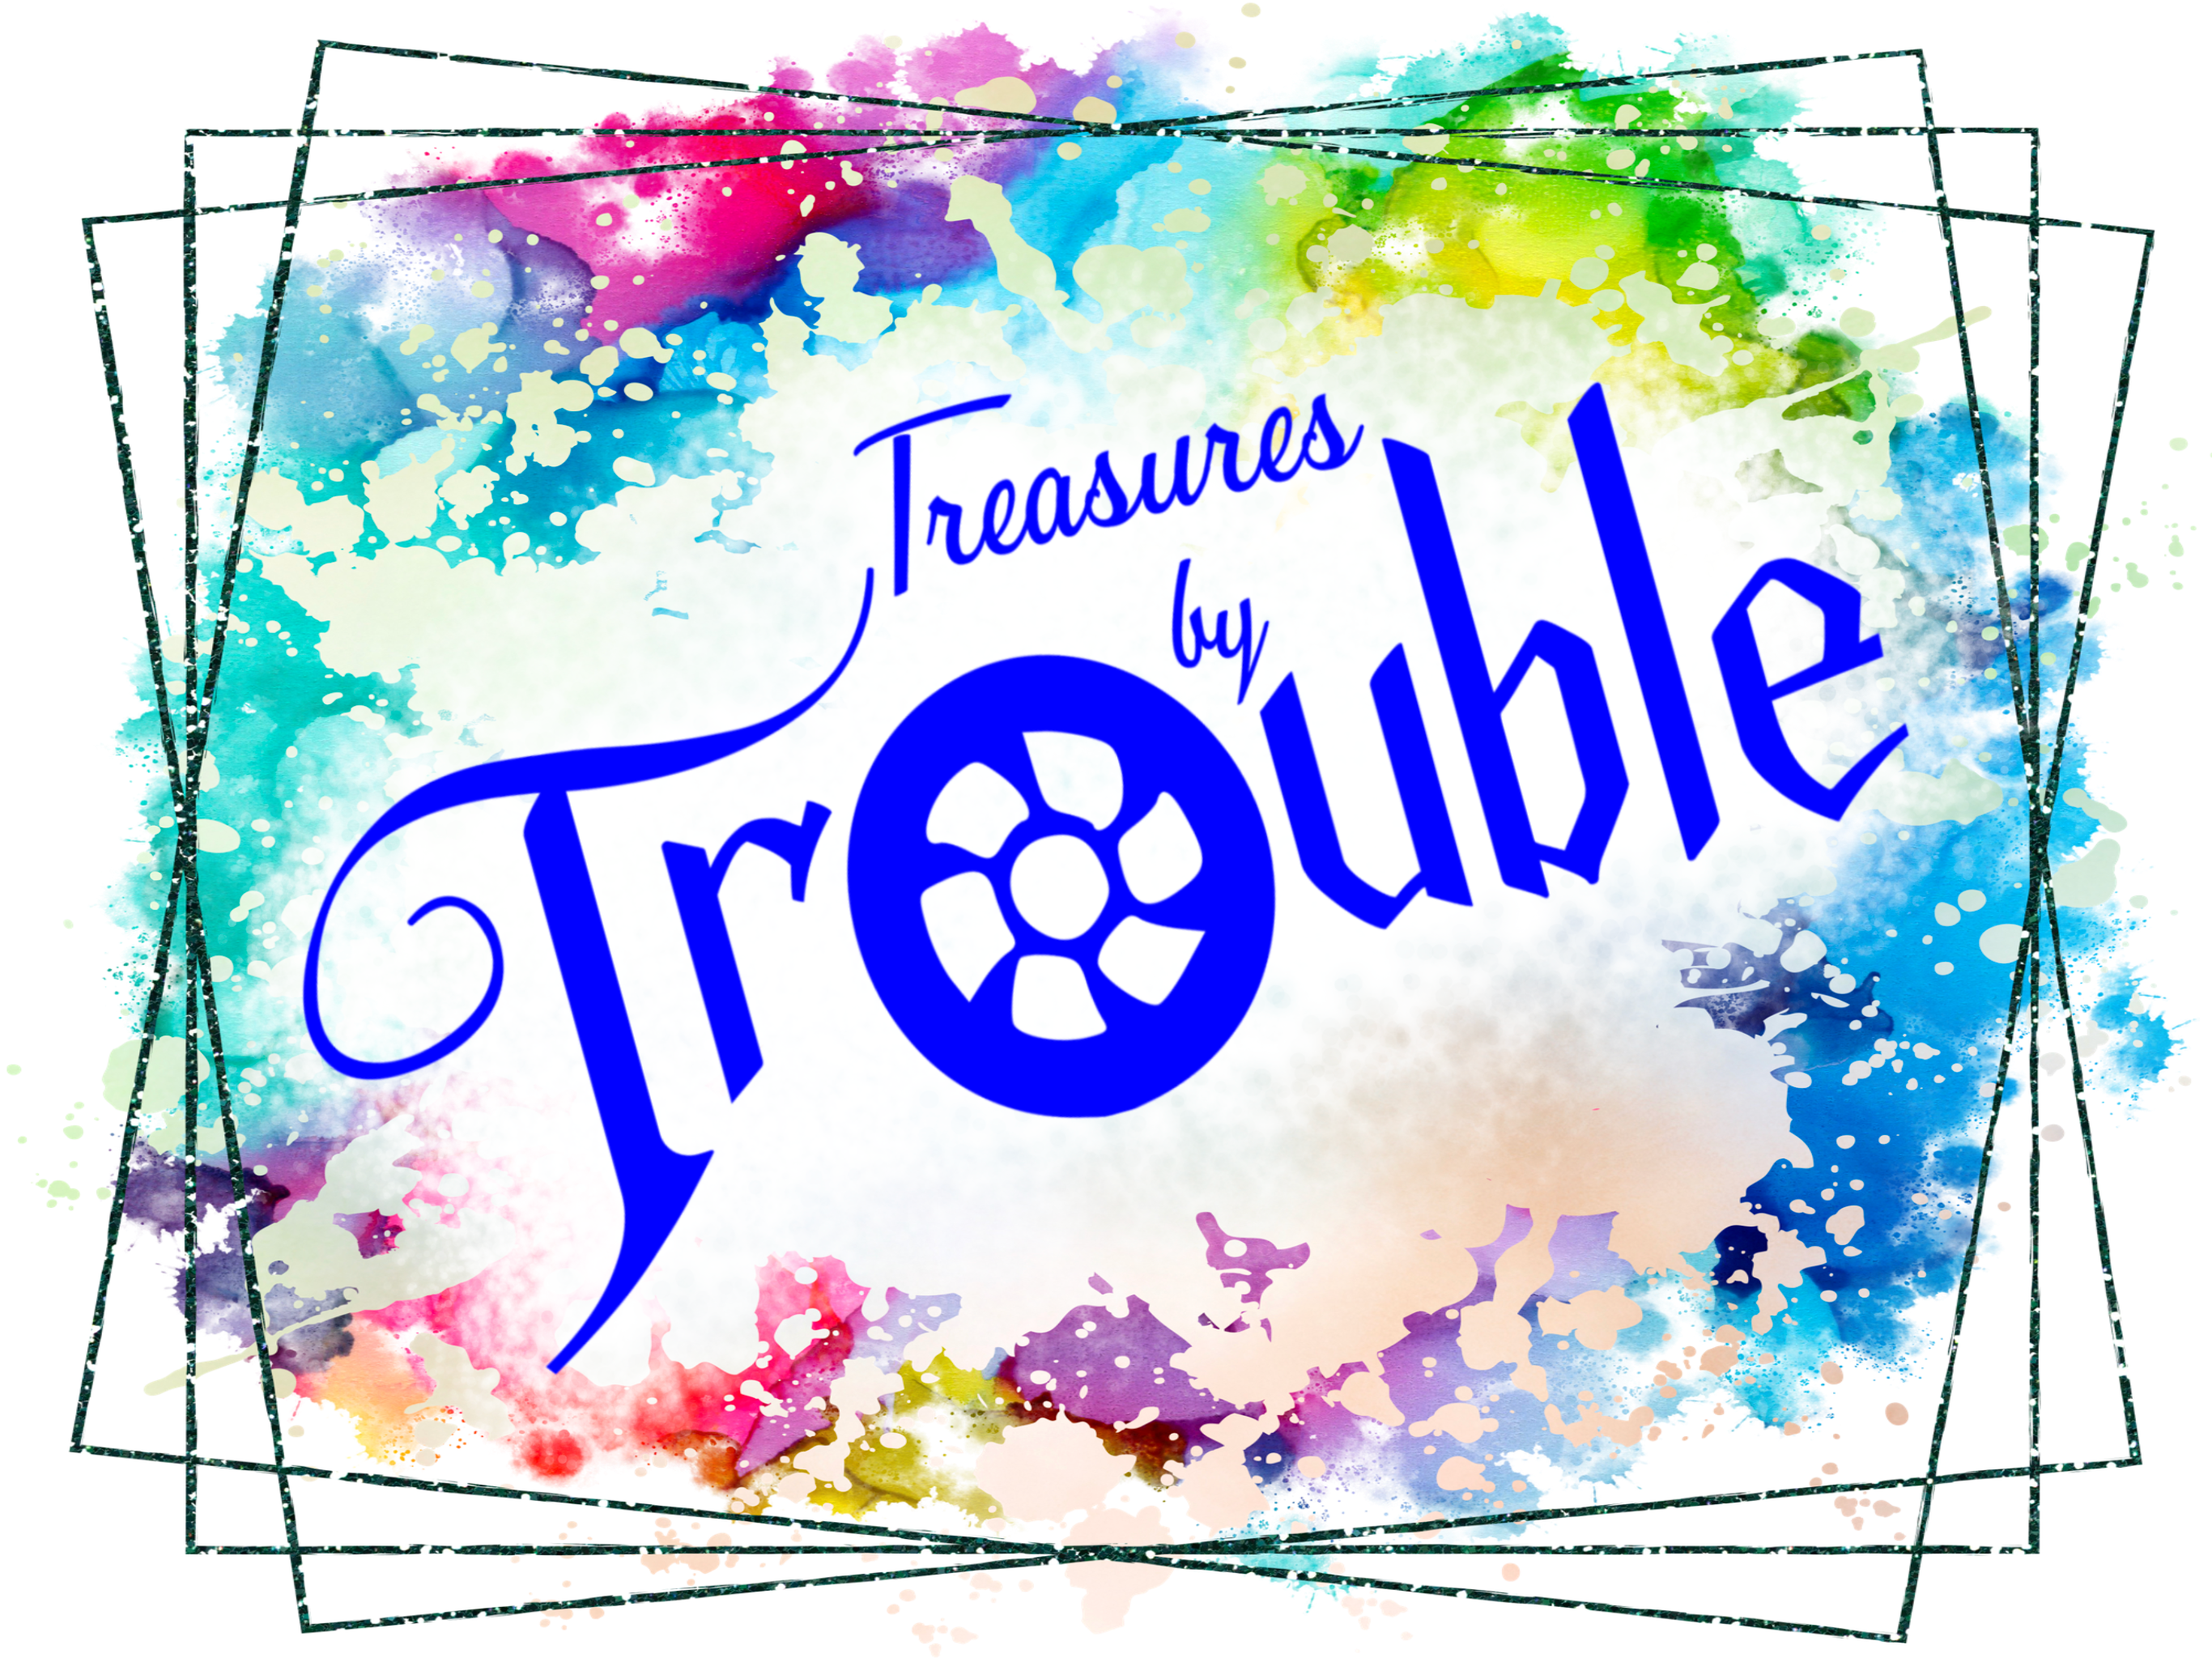 Treasures By Trouble